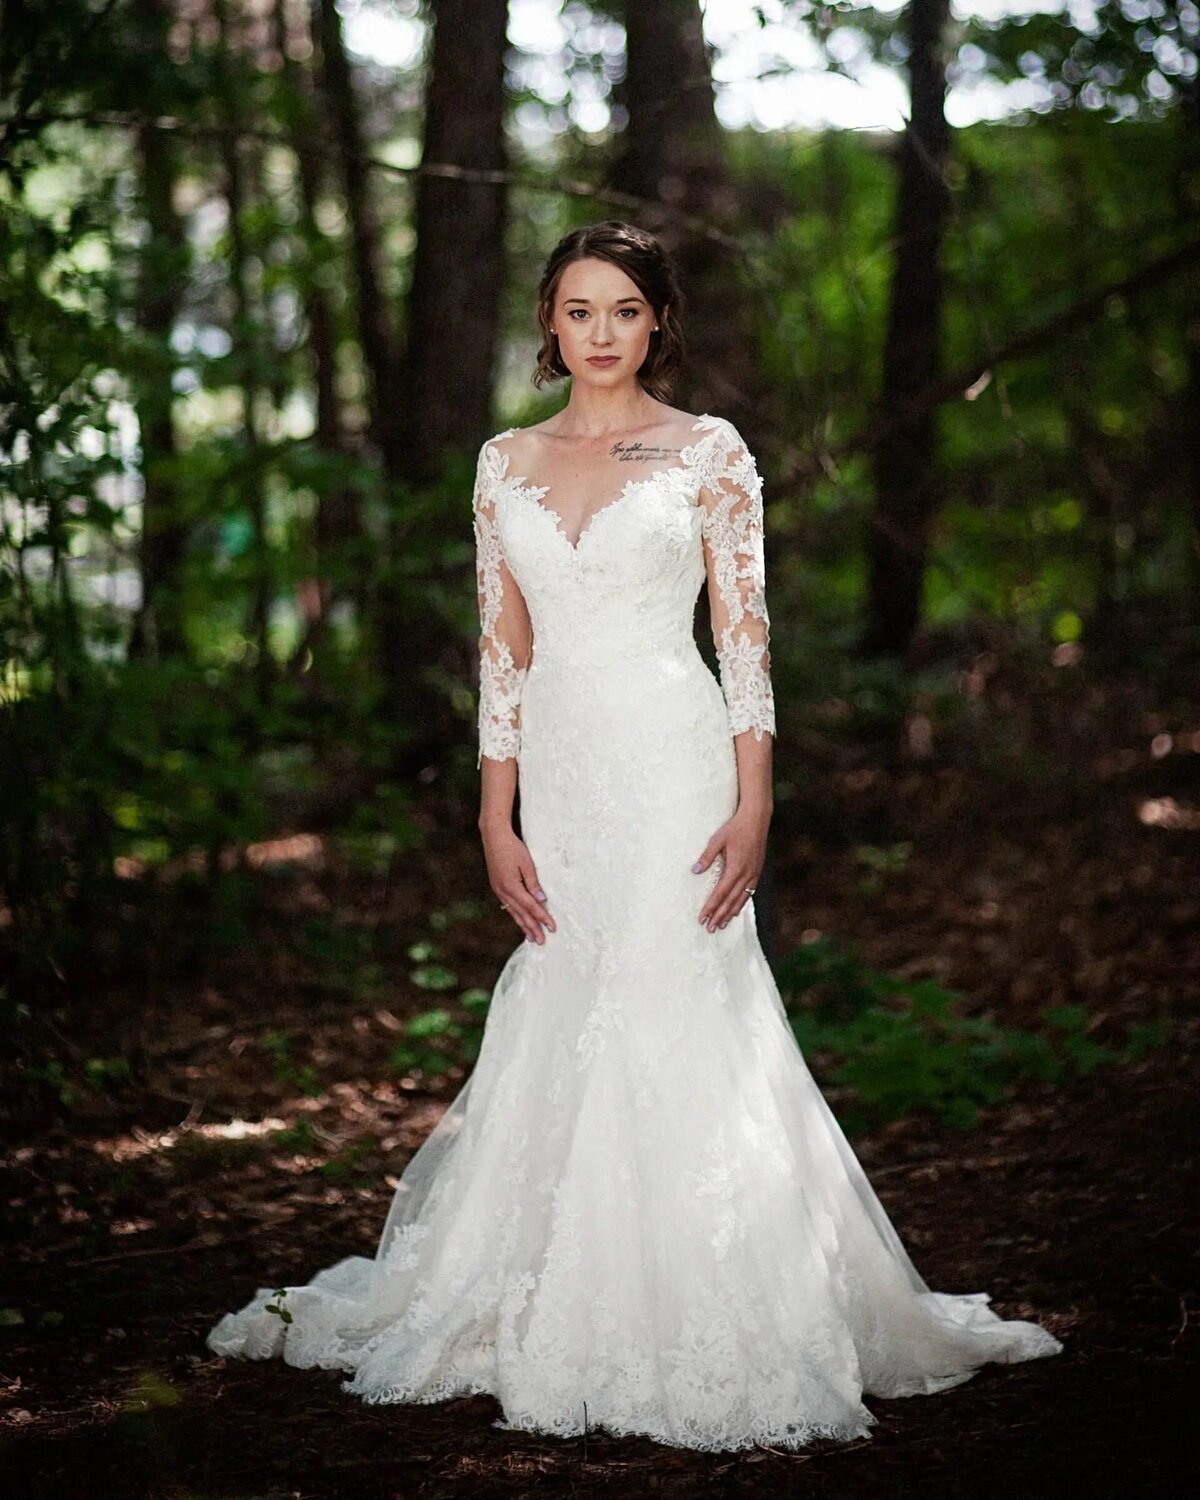 A bride standing in a wooded area.